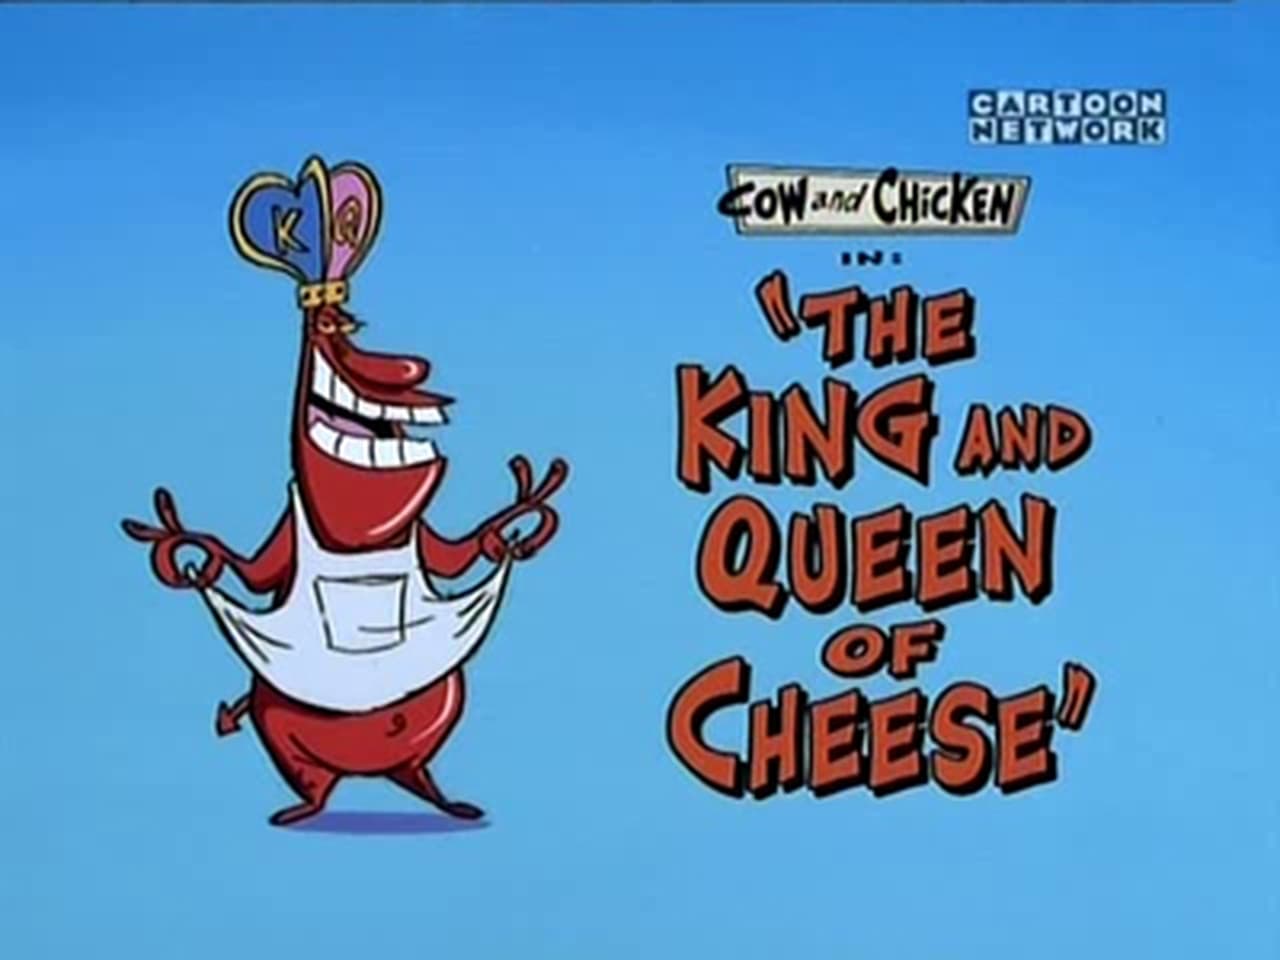 Cow and Chicken - Season 1 Episode 26 : The King and Queen of Cheese